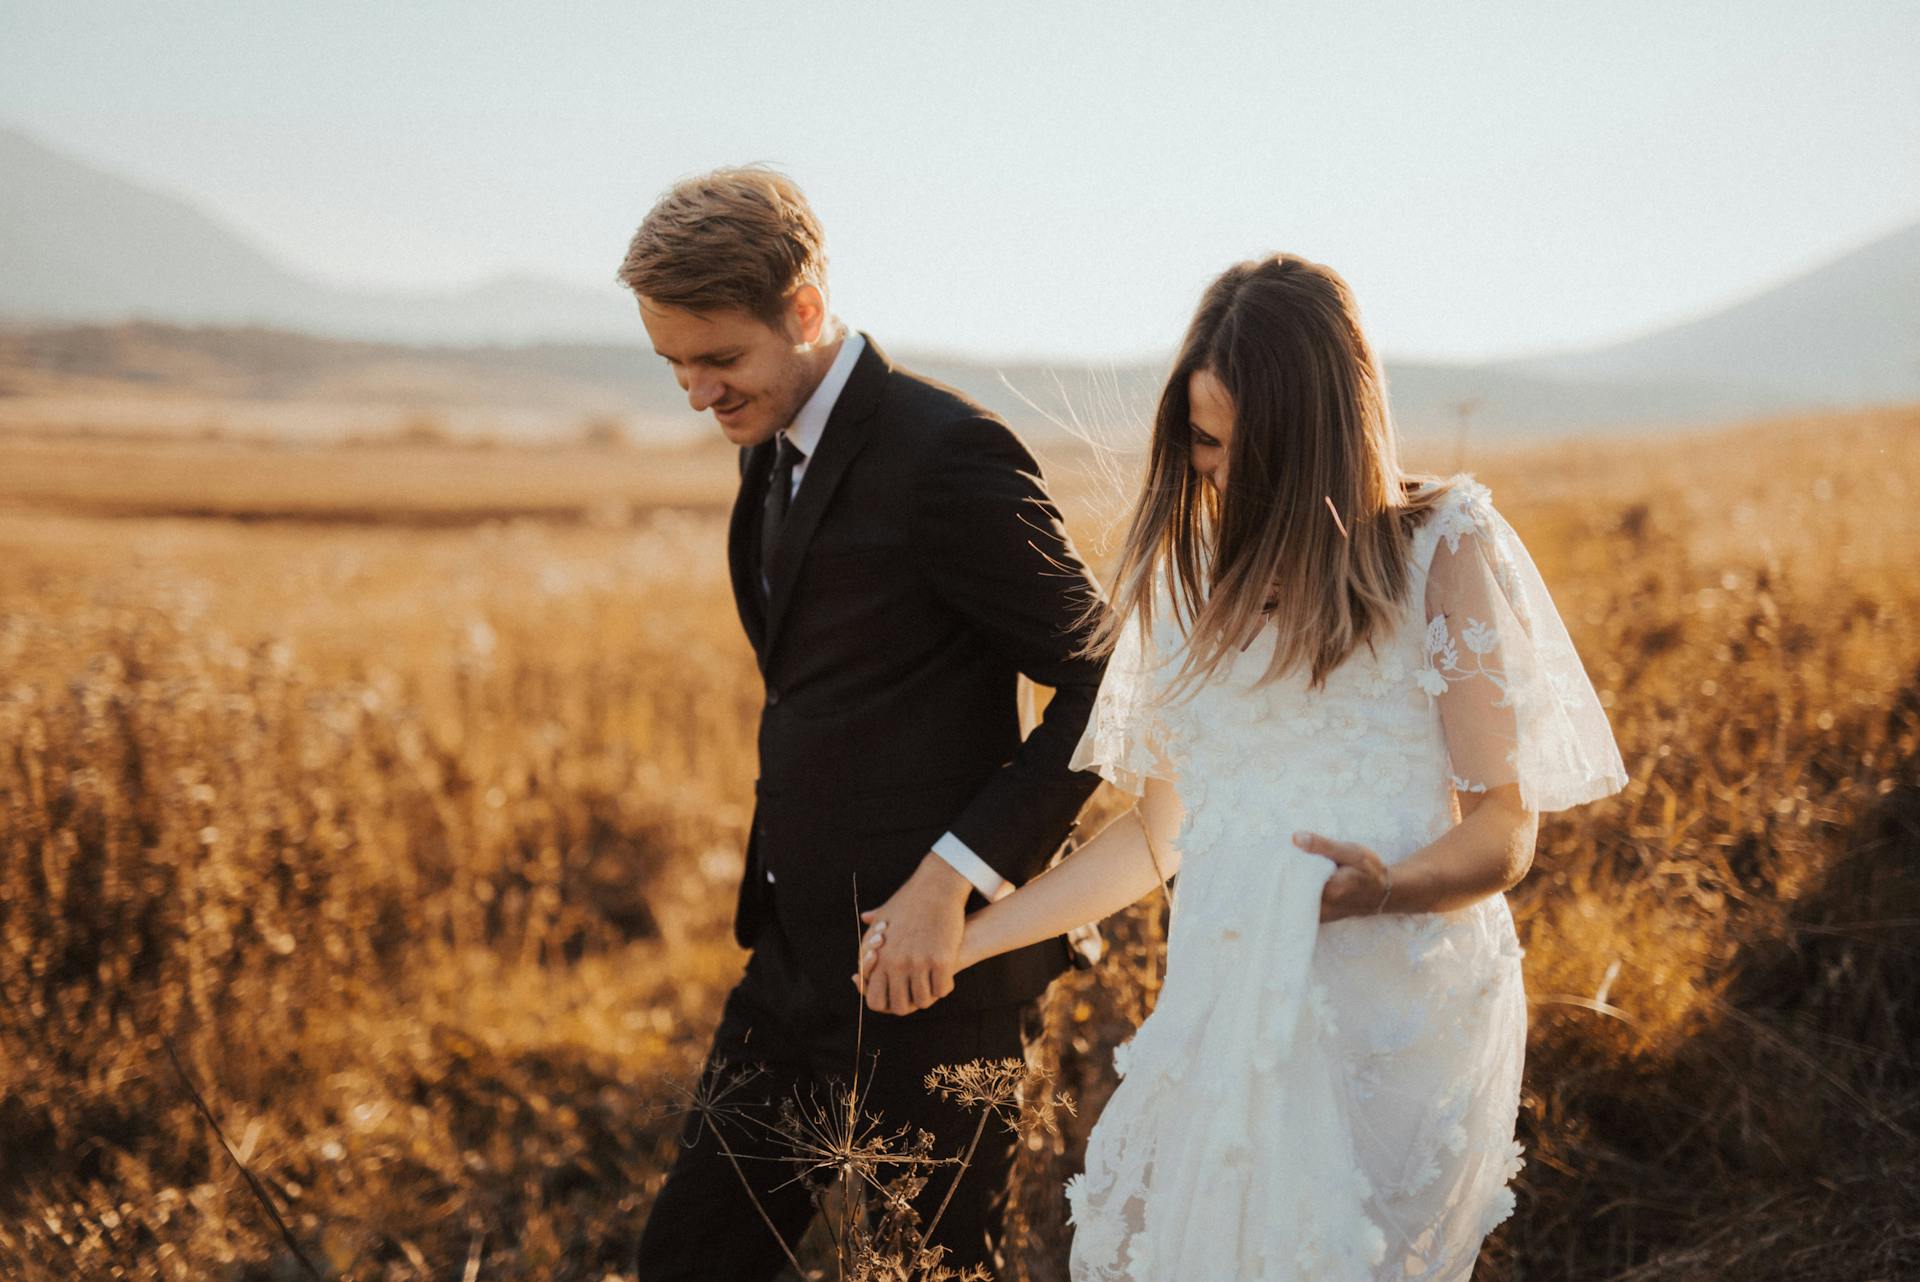 A bride and groom holding hands while passing through a field | Source: Pexels